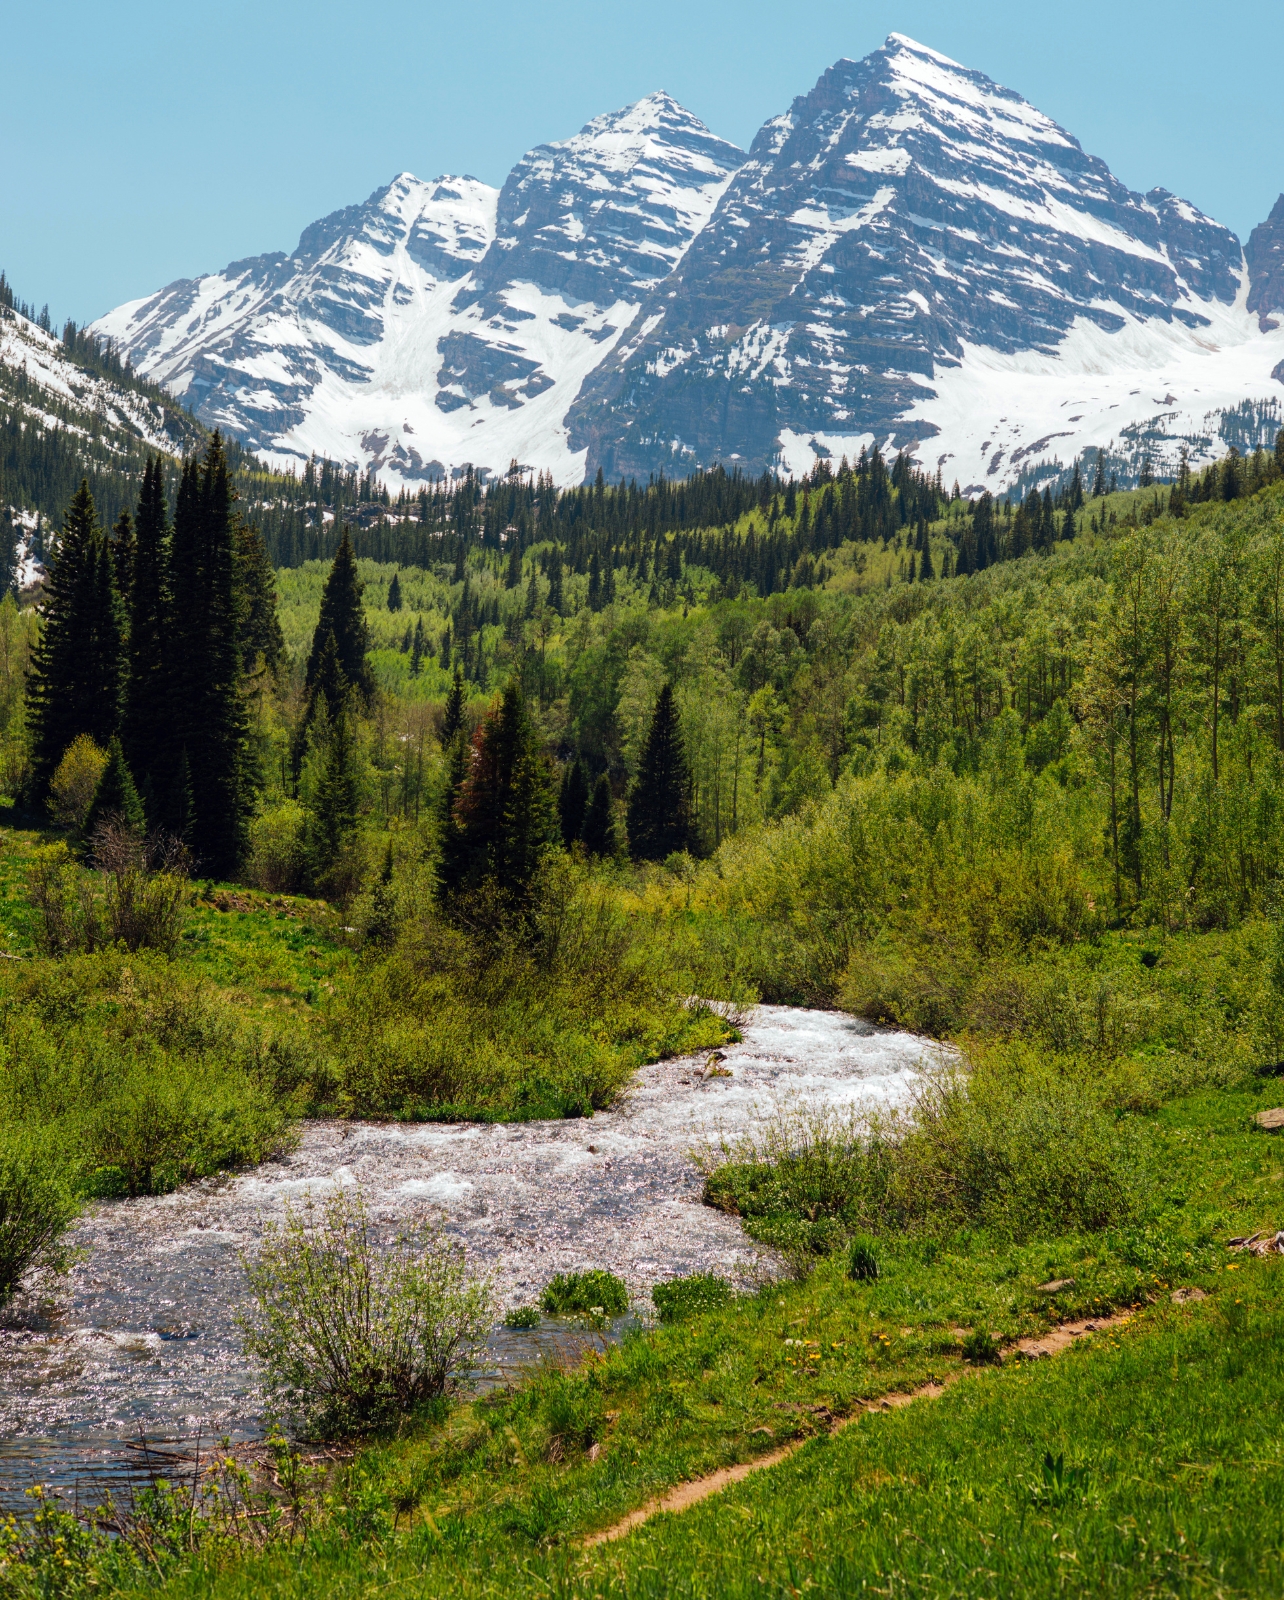 Maroon Bells, mountain and greenery landscape